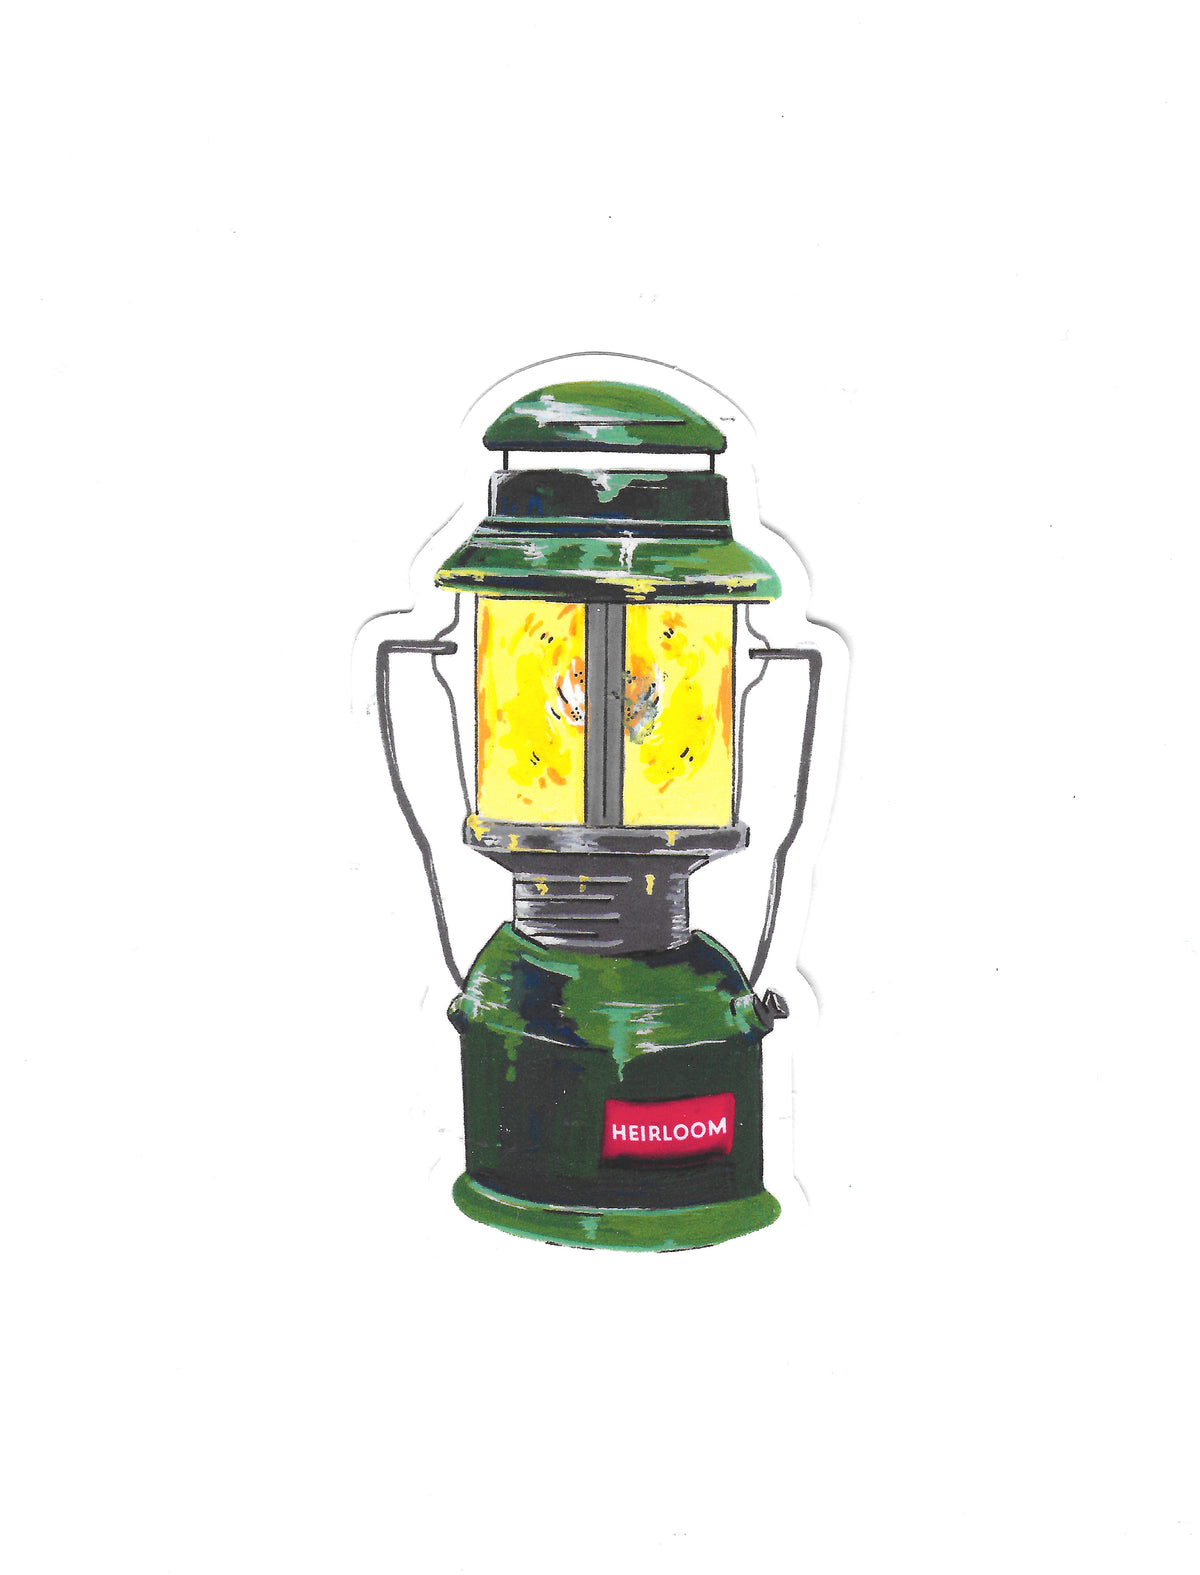 A vinyl sticker featuring a vintage camping lantern design that has been hand painted. It is painted to look like it is glowing. It is green with a red label. 